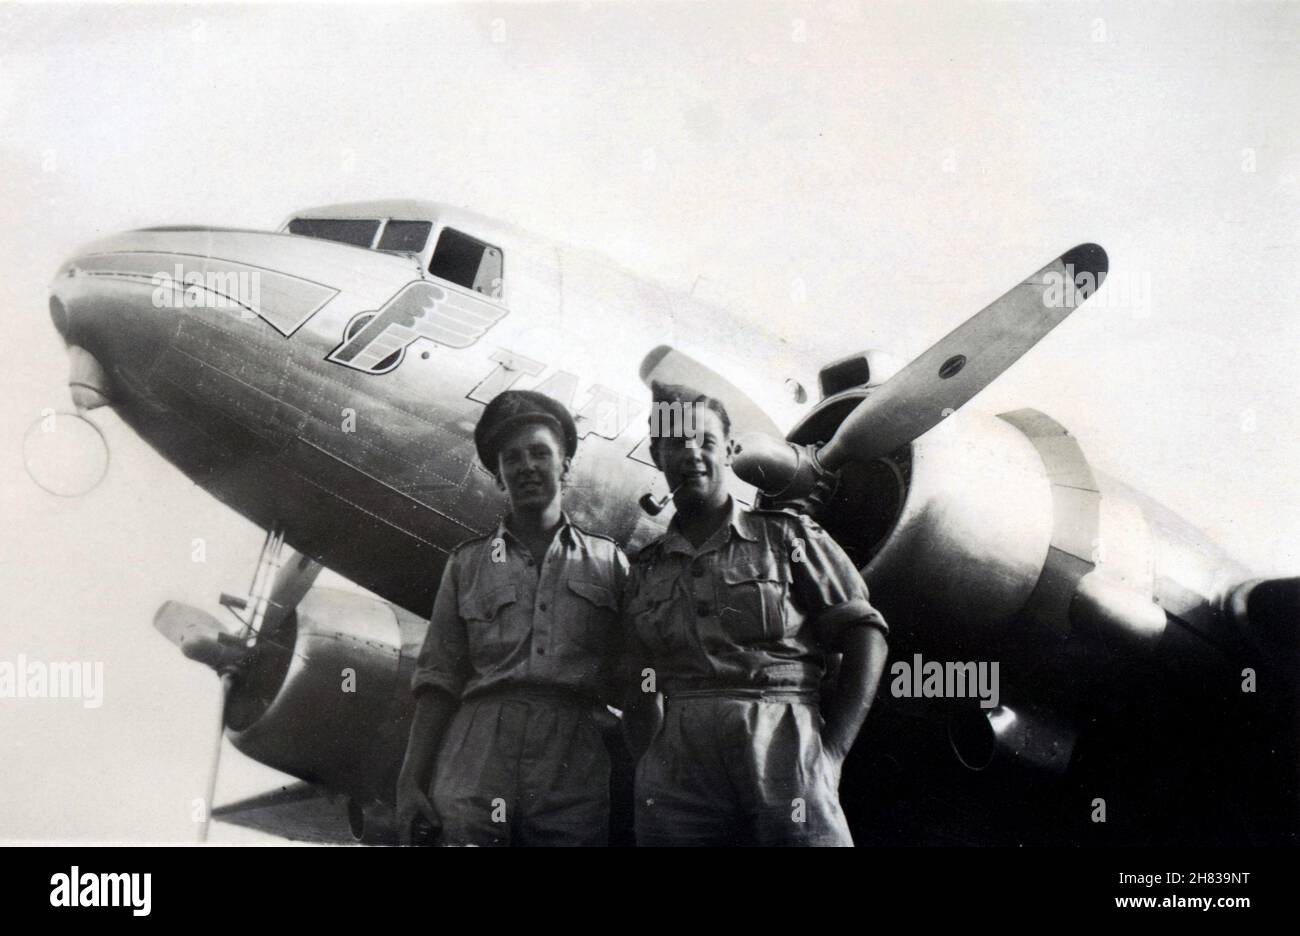 Accra Airport, Ghana, February 1946. RAF pilot officer Browne and sergeant in front of a TAP – Transportes Aéreos Portugueses, DC-3 Dakota. Founded in March 1945, TAP only began commercial flights in September 1946. The flight was probably a test-run for the Linha Aérea Imperial, a twelve-stop colonial service to Angola and Mozambique, which began in December 1946. Stock Photo